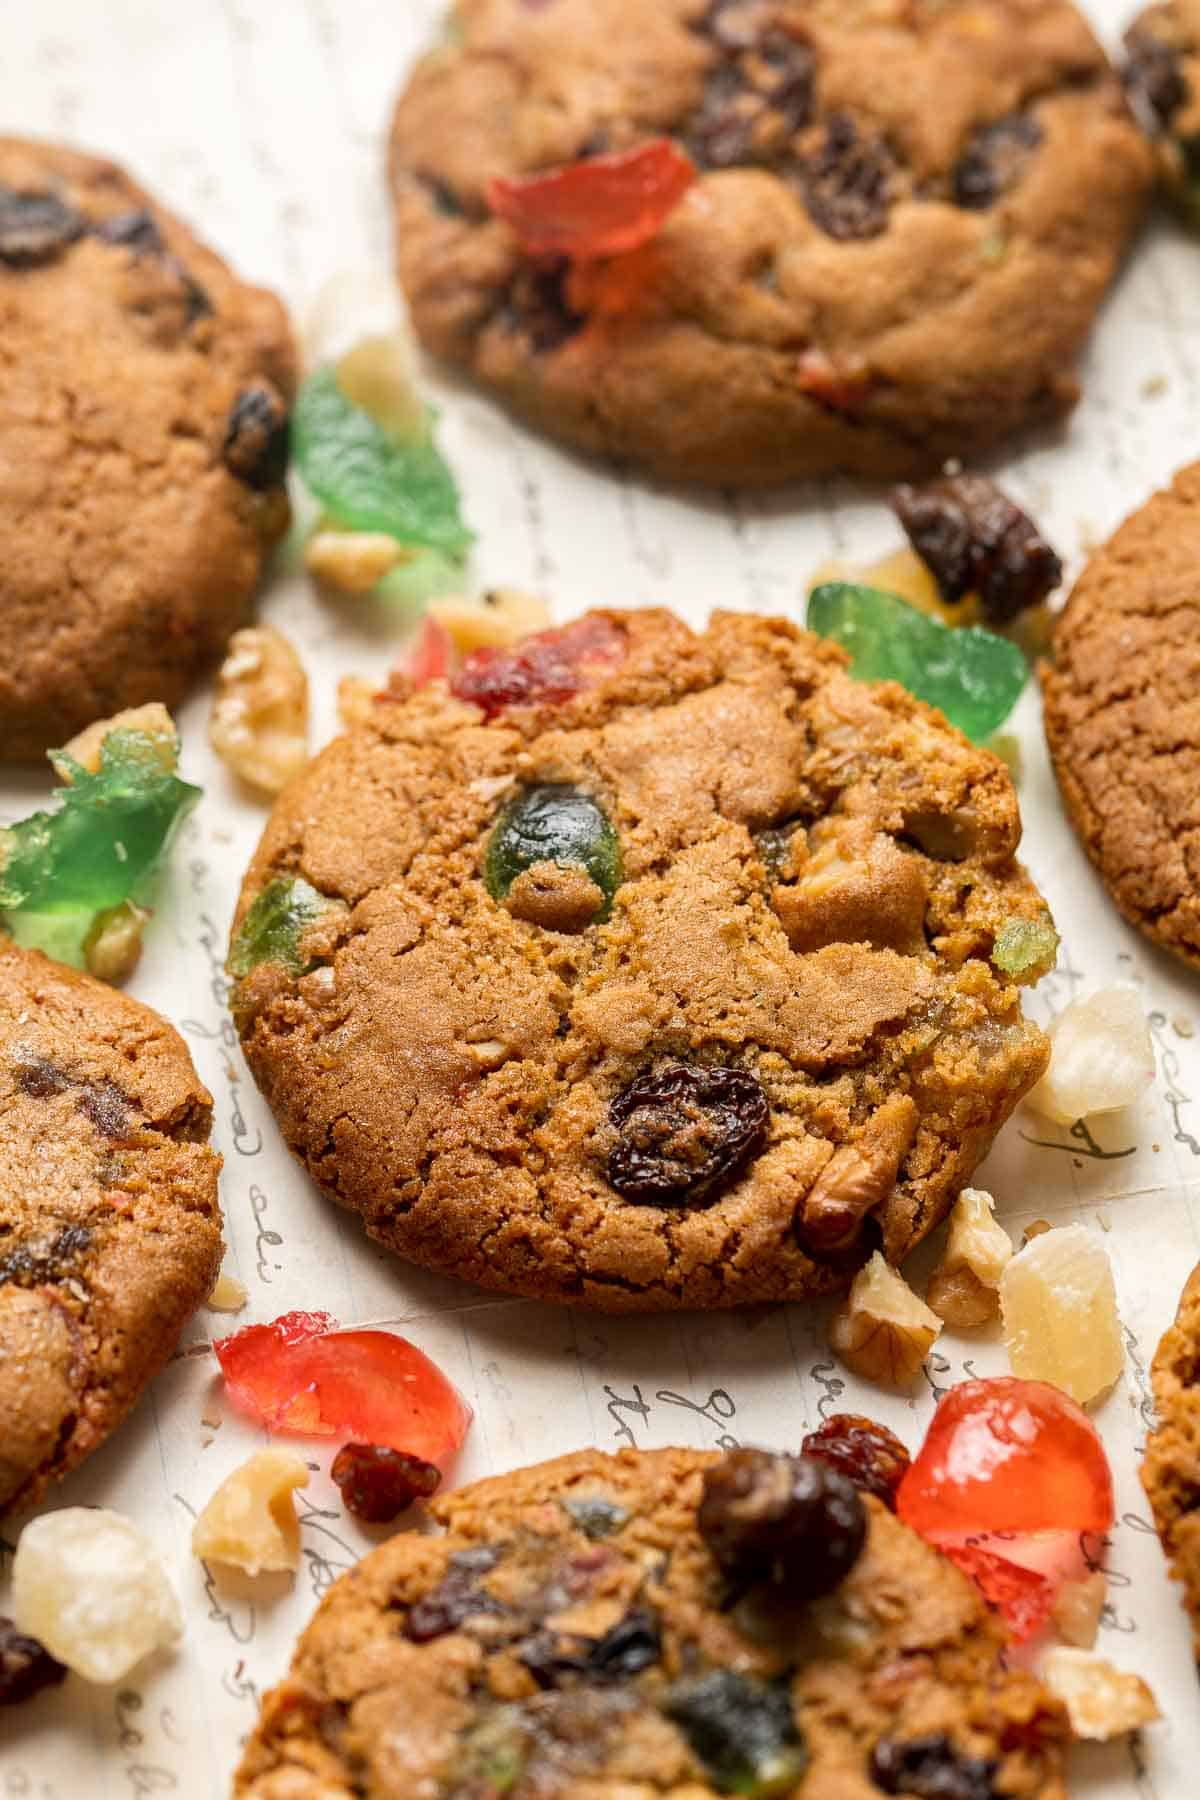 Fruitcake Cookies take all the best parts of fruitcake and turn it into cookie form. They’re soft, chewy, and thick holiday cookies with crisp edges. | aheadofthyme.com